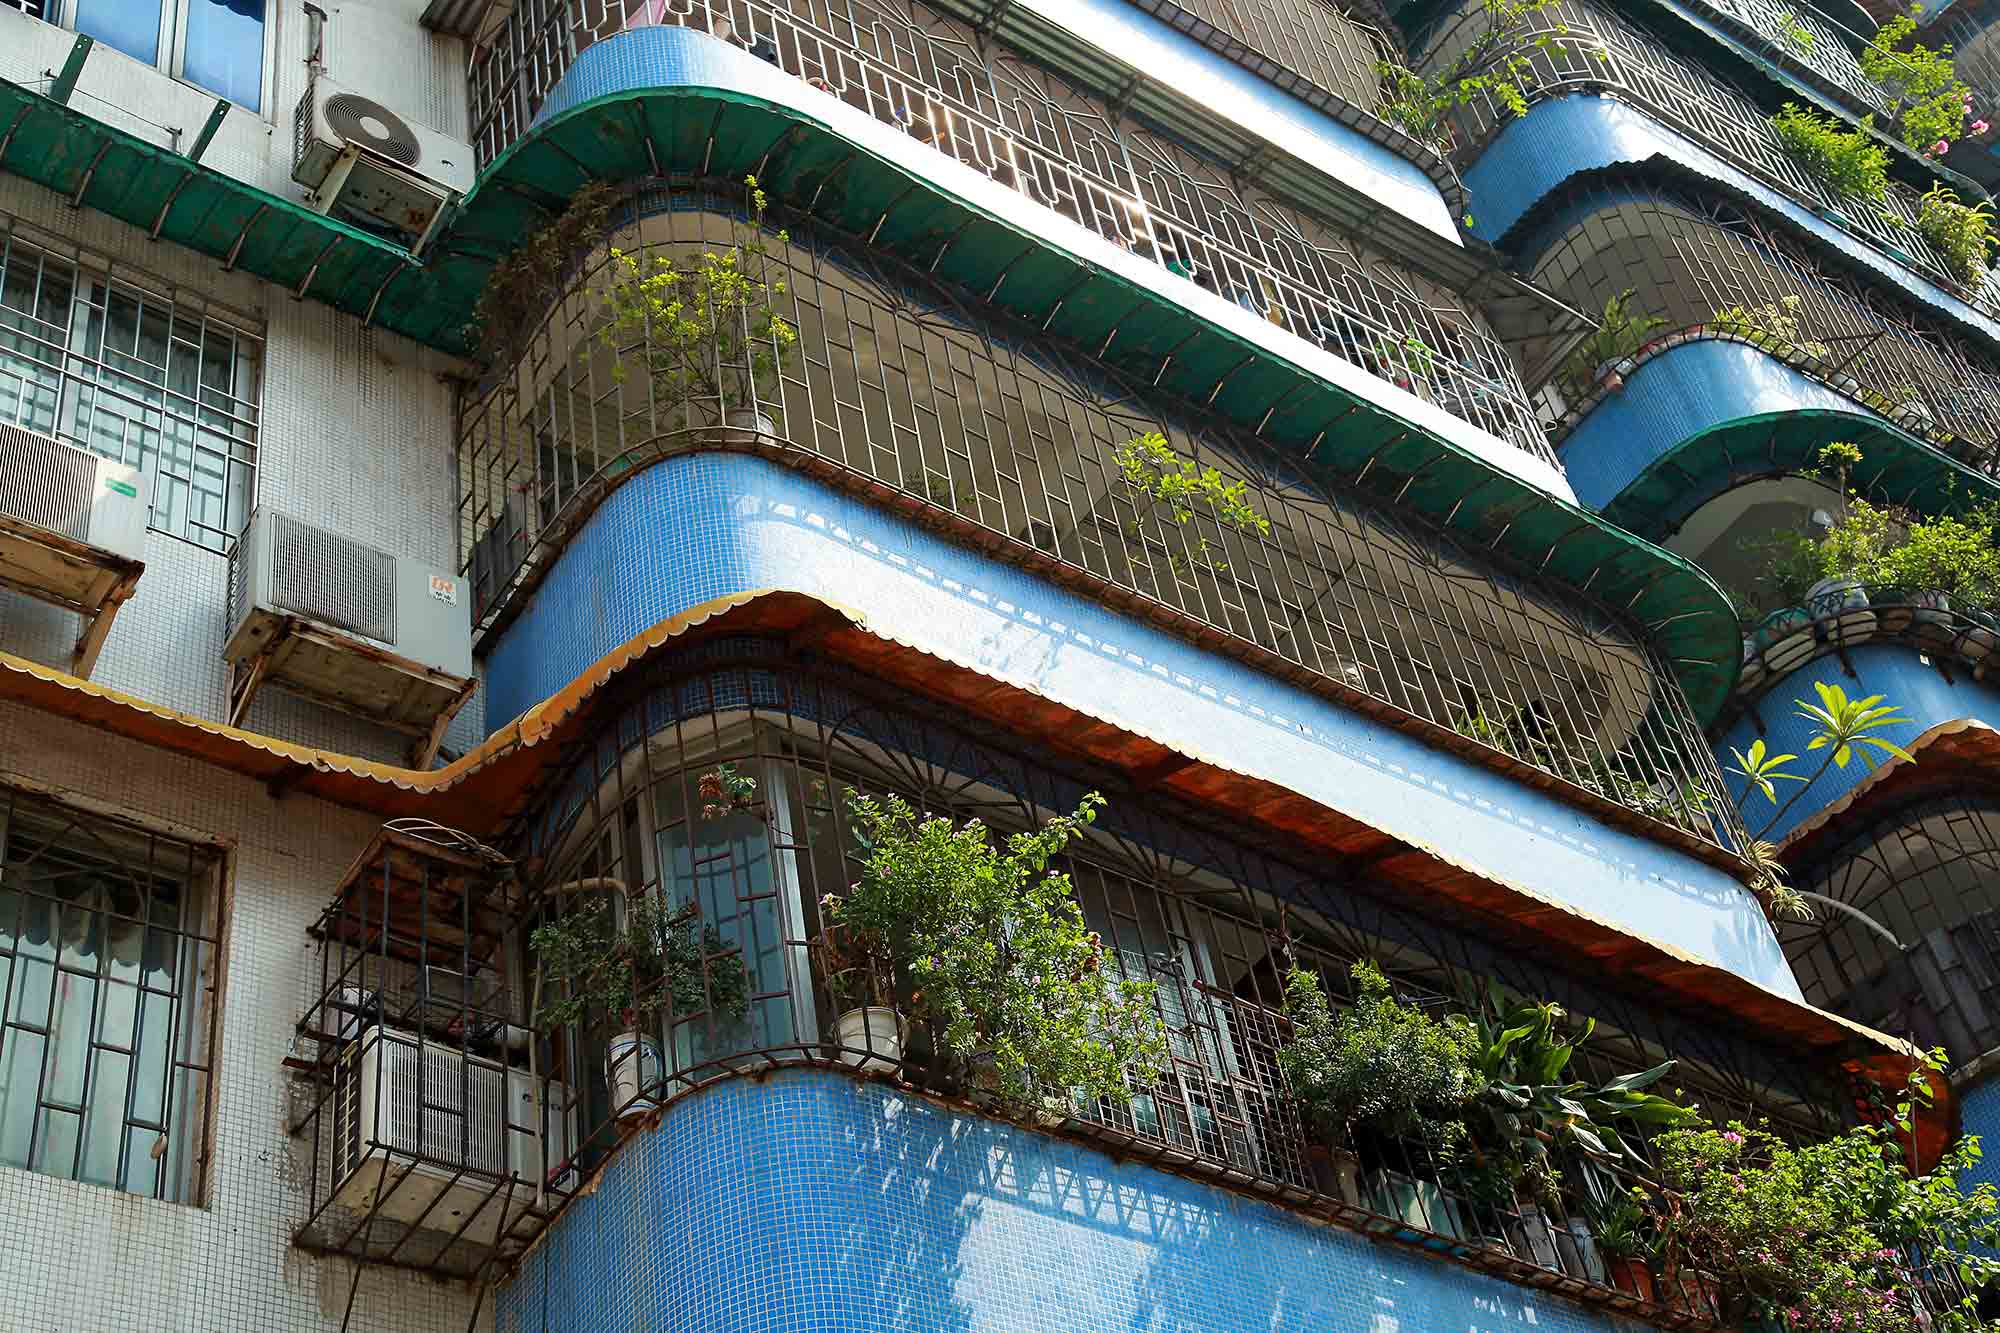 A typical chinese apartment block. © Ulli Maier & Nisa Maier